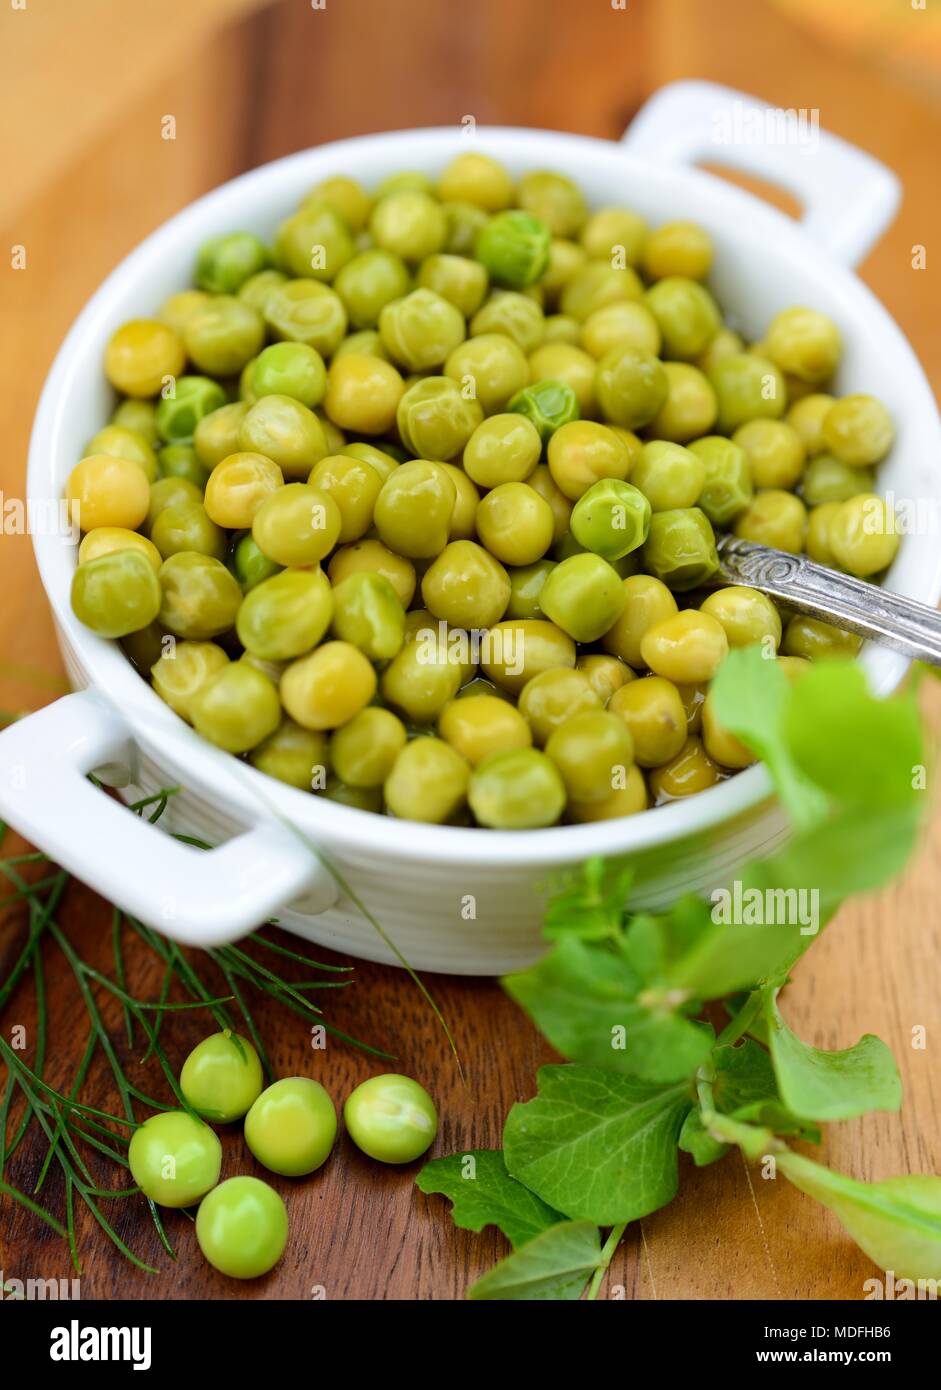 Boiled young green peas in a white bowl. Stock Photo